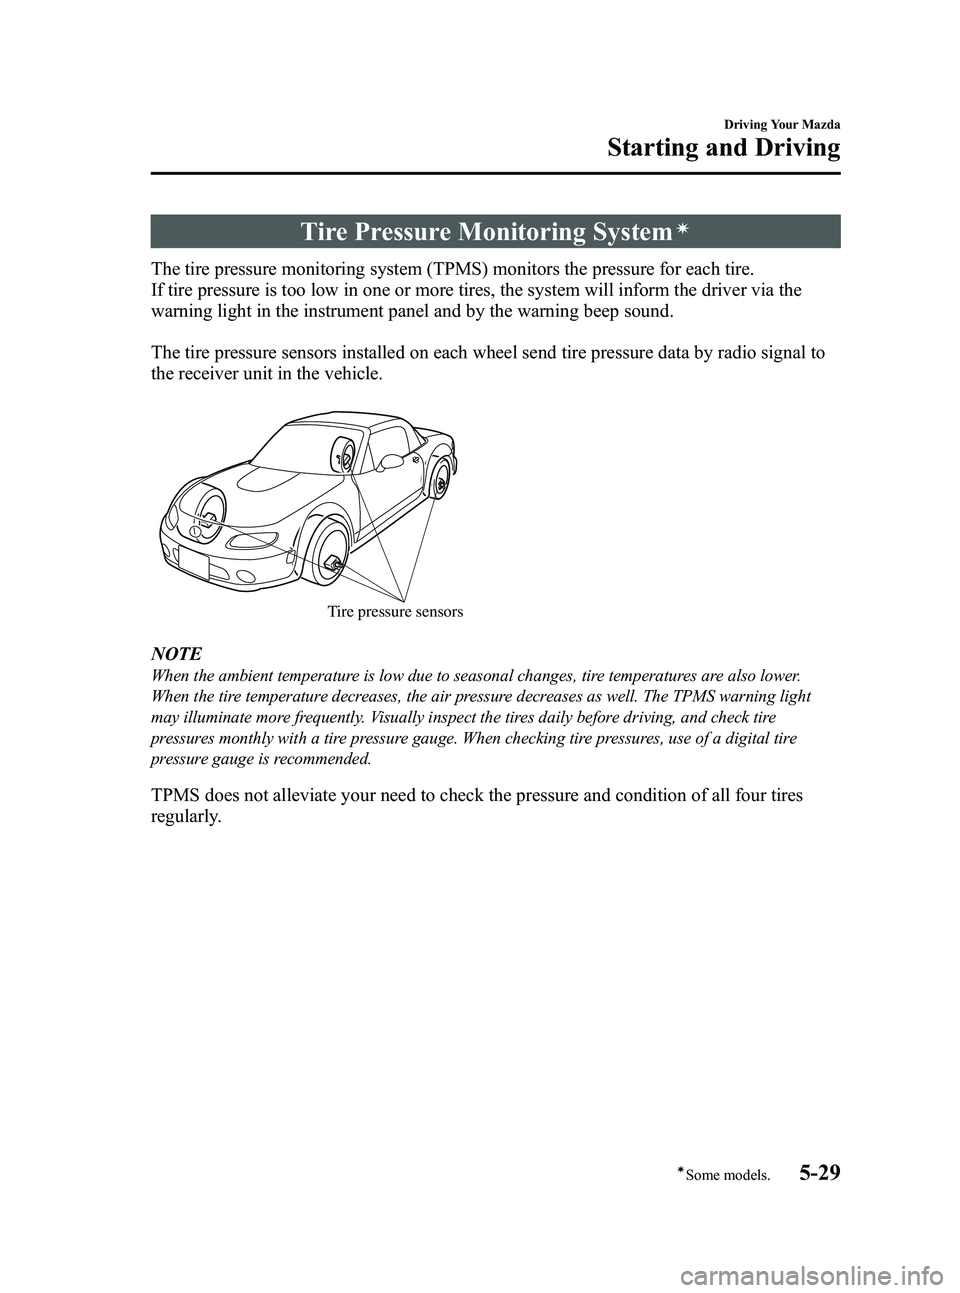 MAZDA MODEL MX-5 MIATA POWER RETRACTABLE HARDTOP 2010  Owners Manual Black plate (181,1)
Tire Pressure Monitoring Systemí
The tire pressure monitoring system (TPMS) monitors the pressure for each tire.
If tire pressure is too low in one or more tires, the system will 